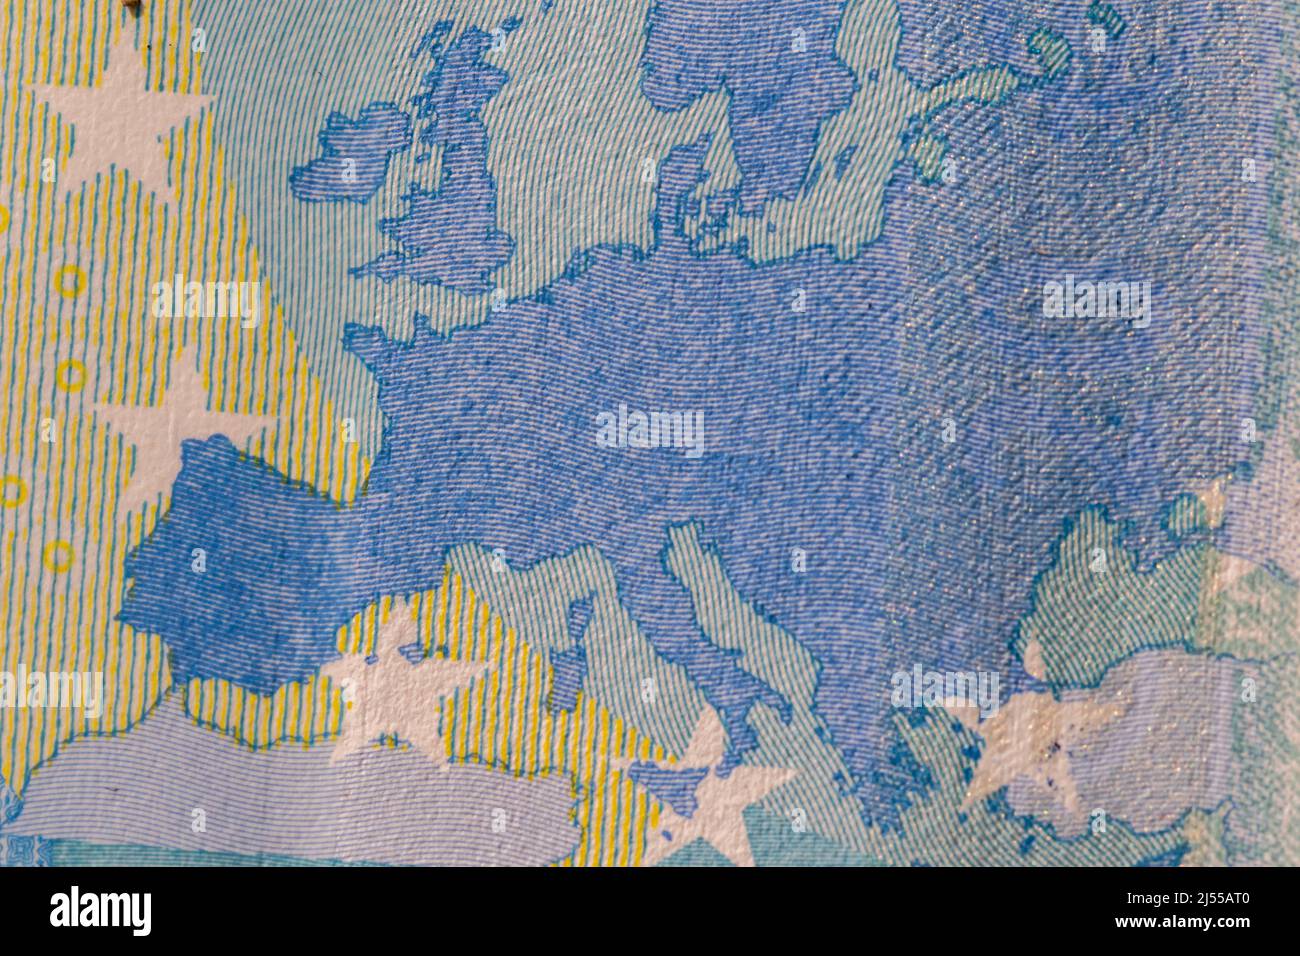 Close-up shot of Europe's map displayed on Euro banknote Stock Photo